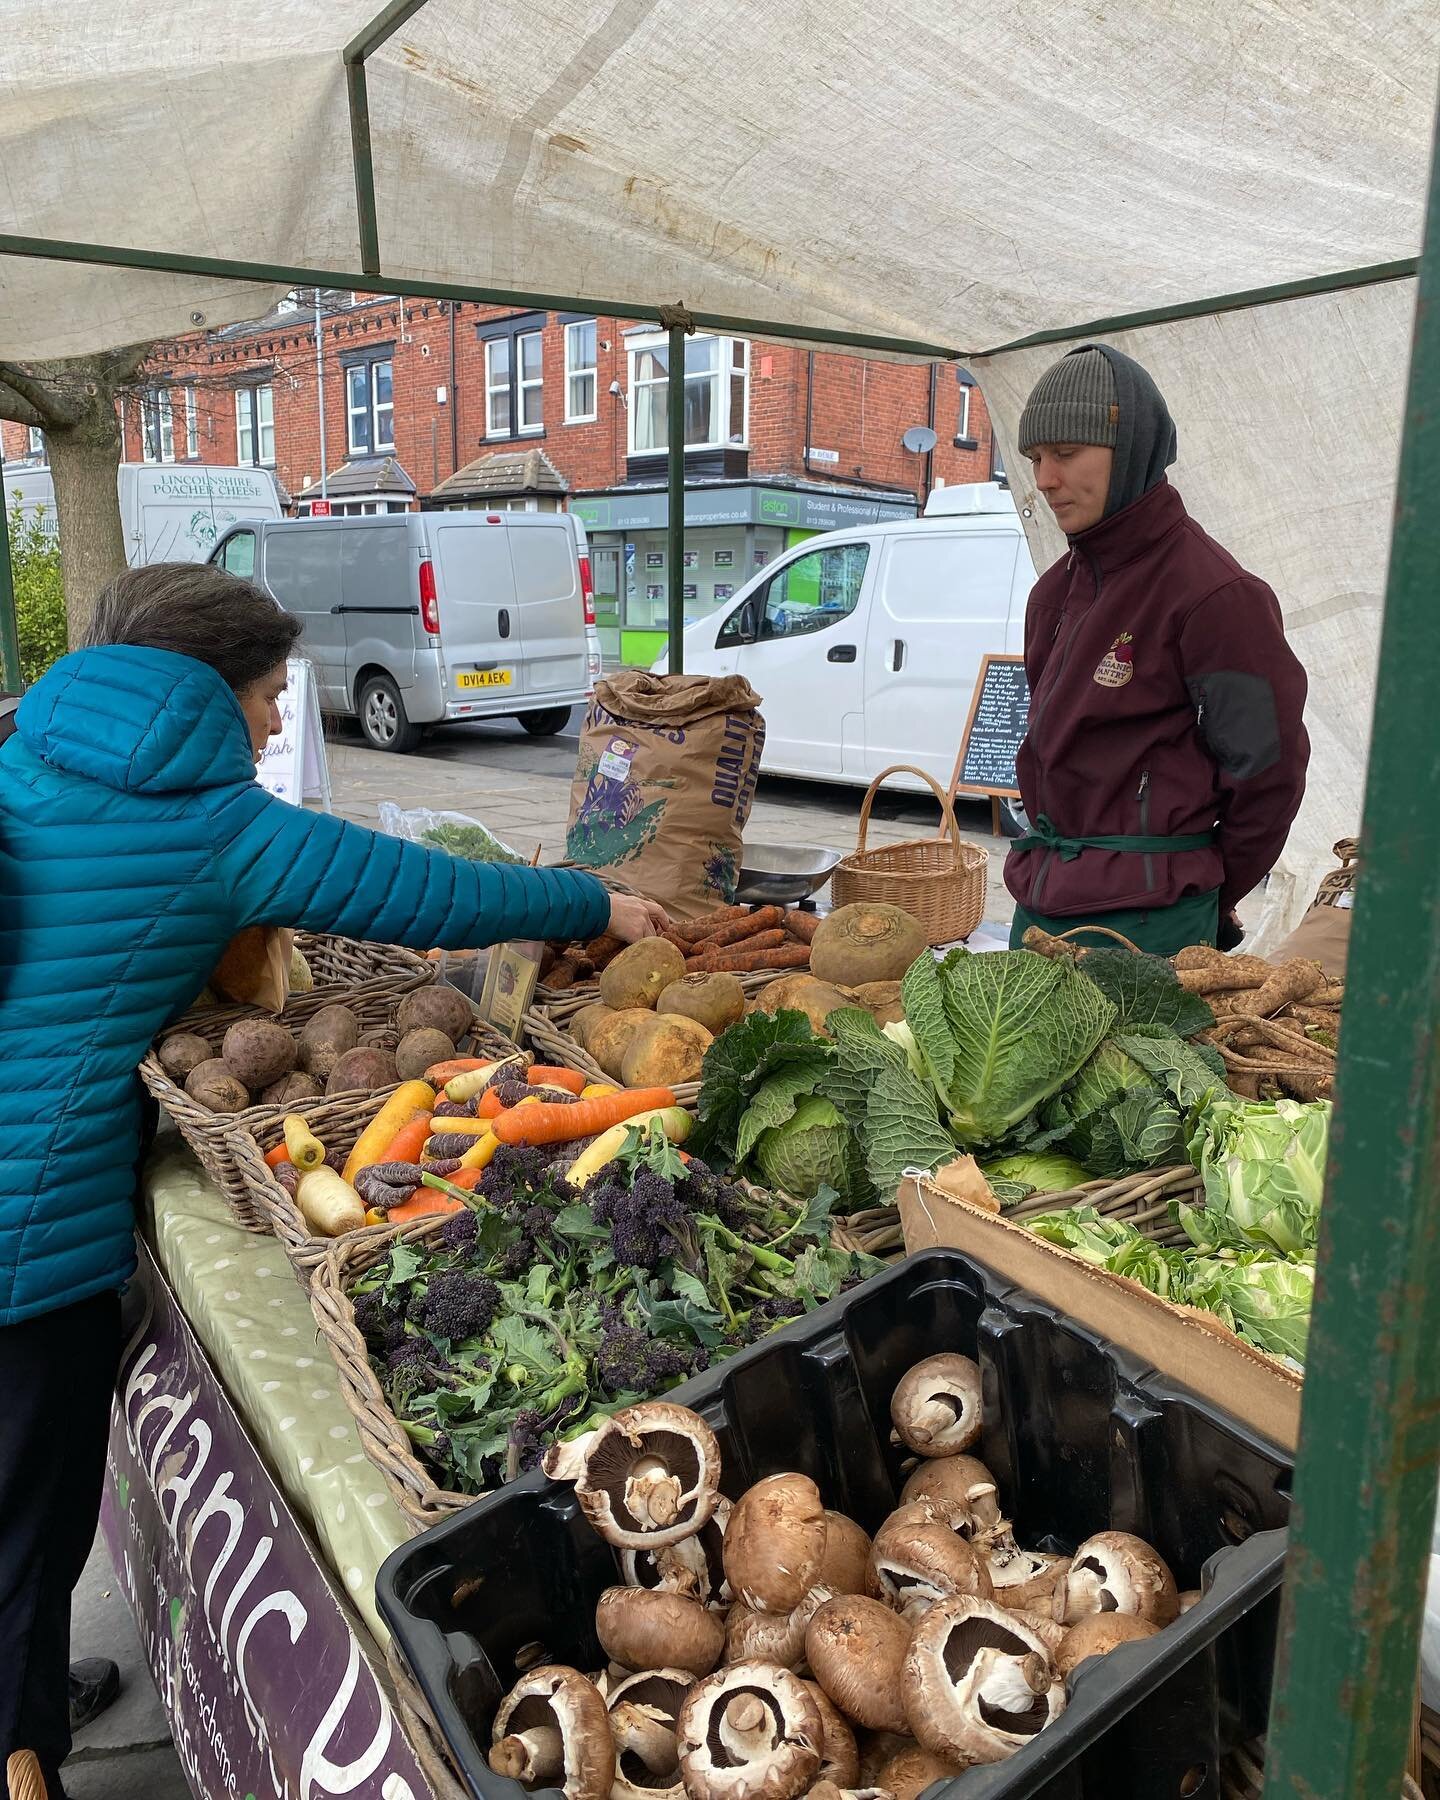 Seasonal fruit &amp; veg on offer from Organic Pantry today, whether it&rsquo;s purple sprouting broccoli, heritage carrots or chestnut mushroom, they&rsquo;ve got you covered! 🥦🥕🧅🥬
@organicpantry1